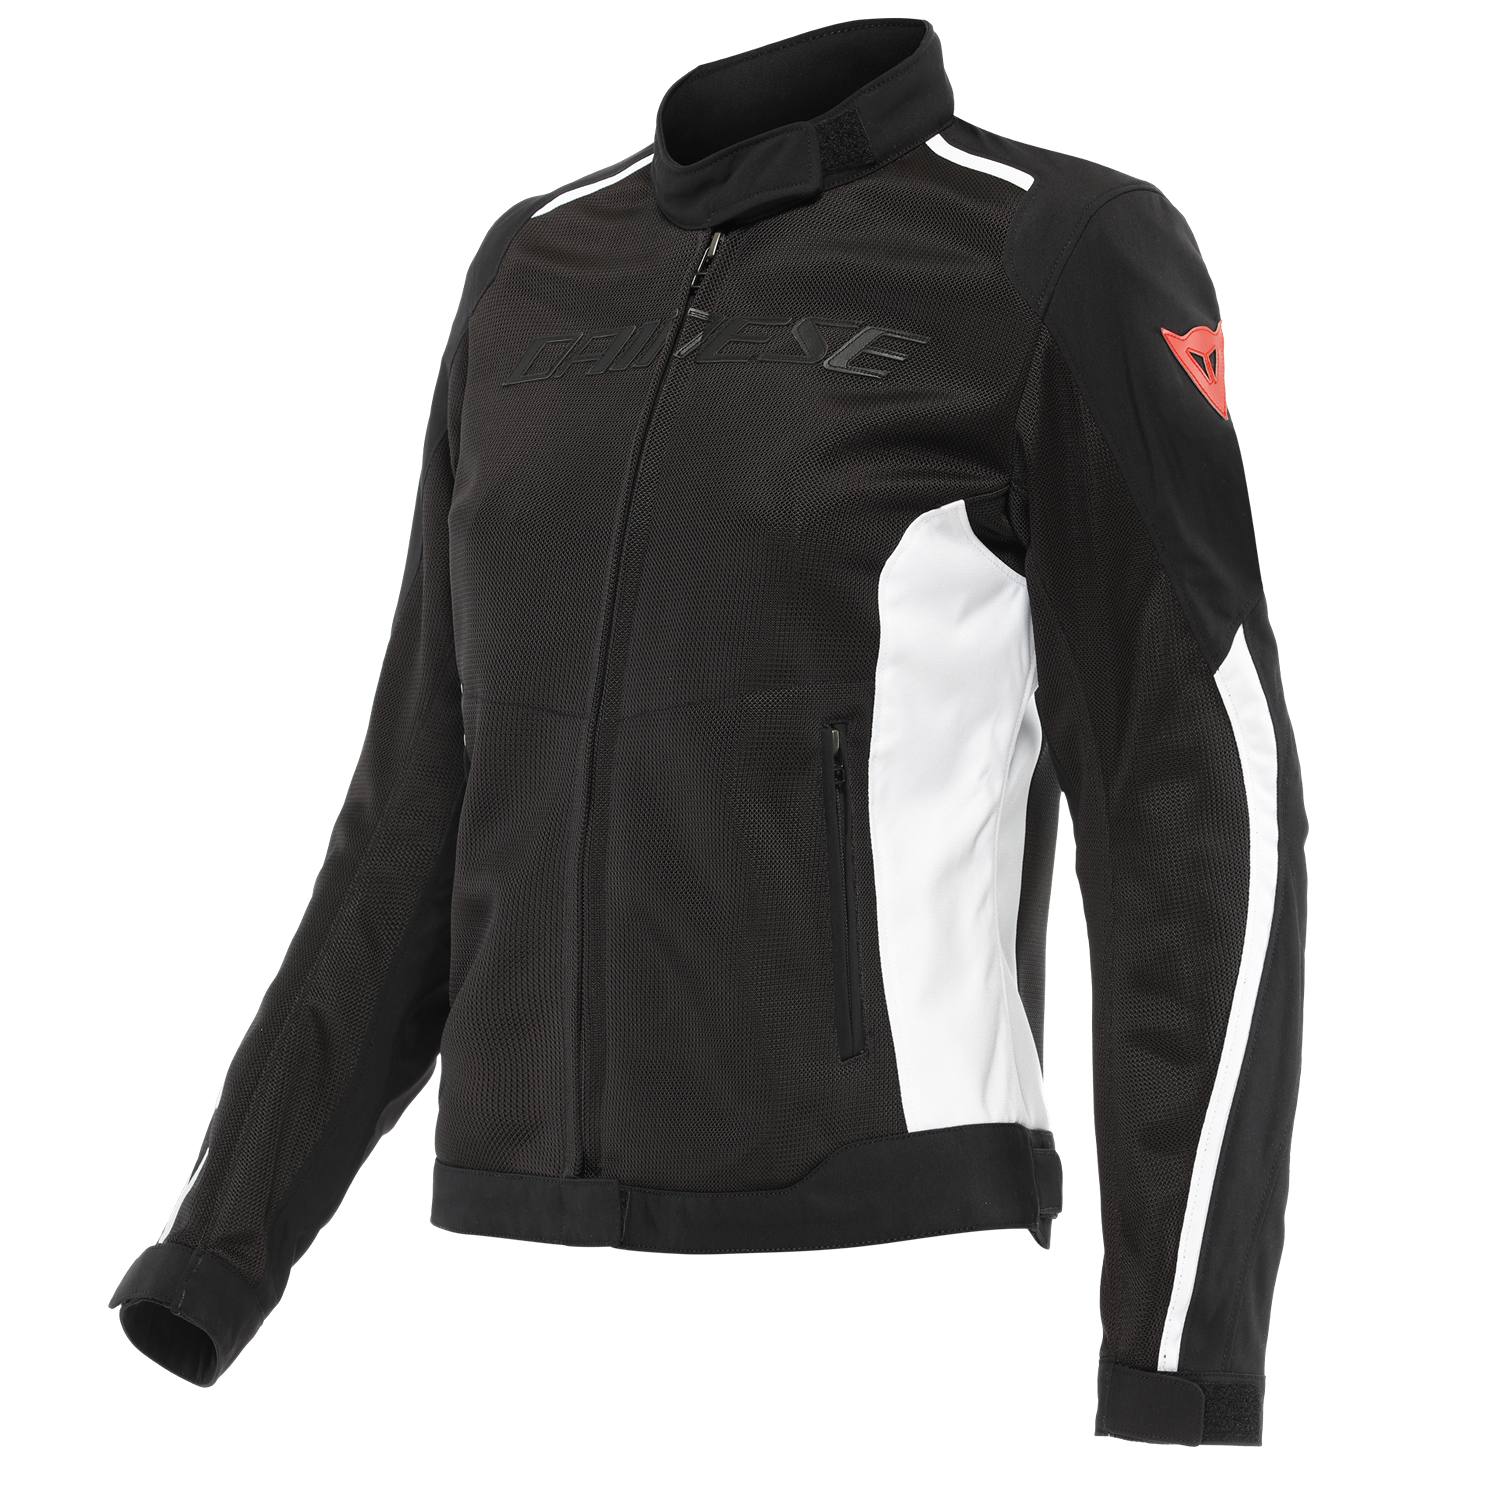 Image of Dainese Hydraflux 2 Air D-Dry Jacket Lady Black White Size 40 ID 8051019401717